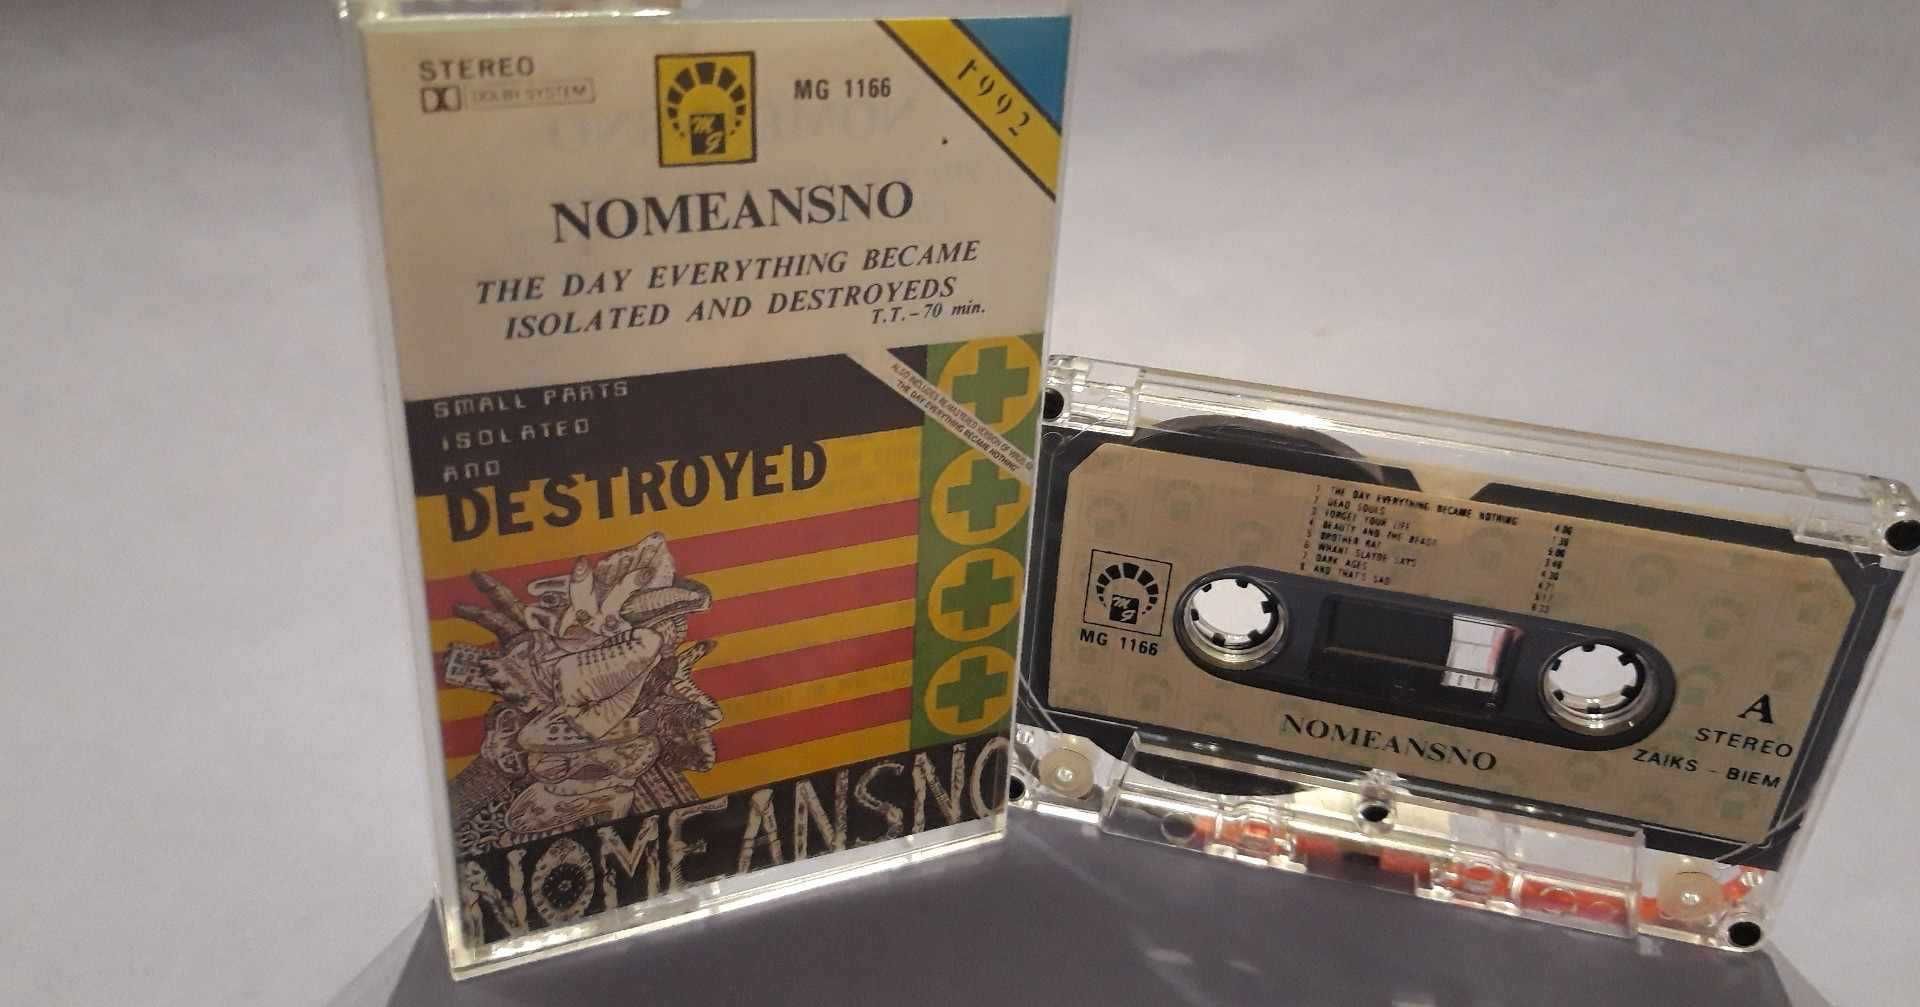 Nomeansno – The Day Everything Became Isolated And Destroyed